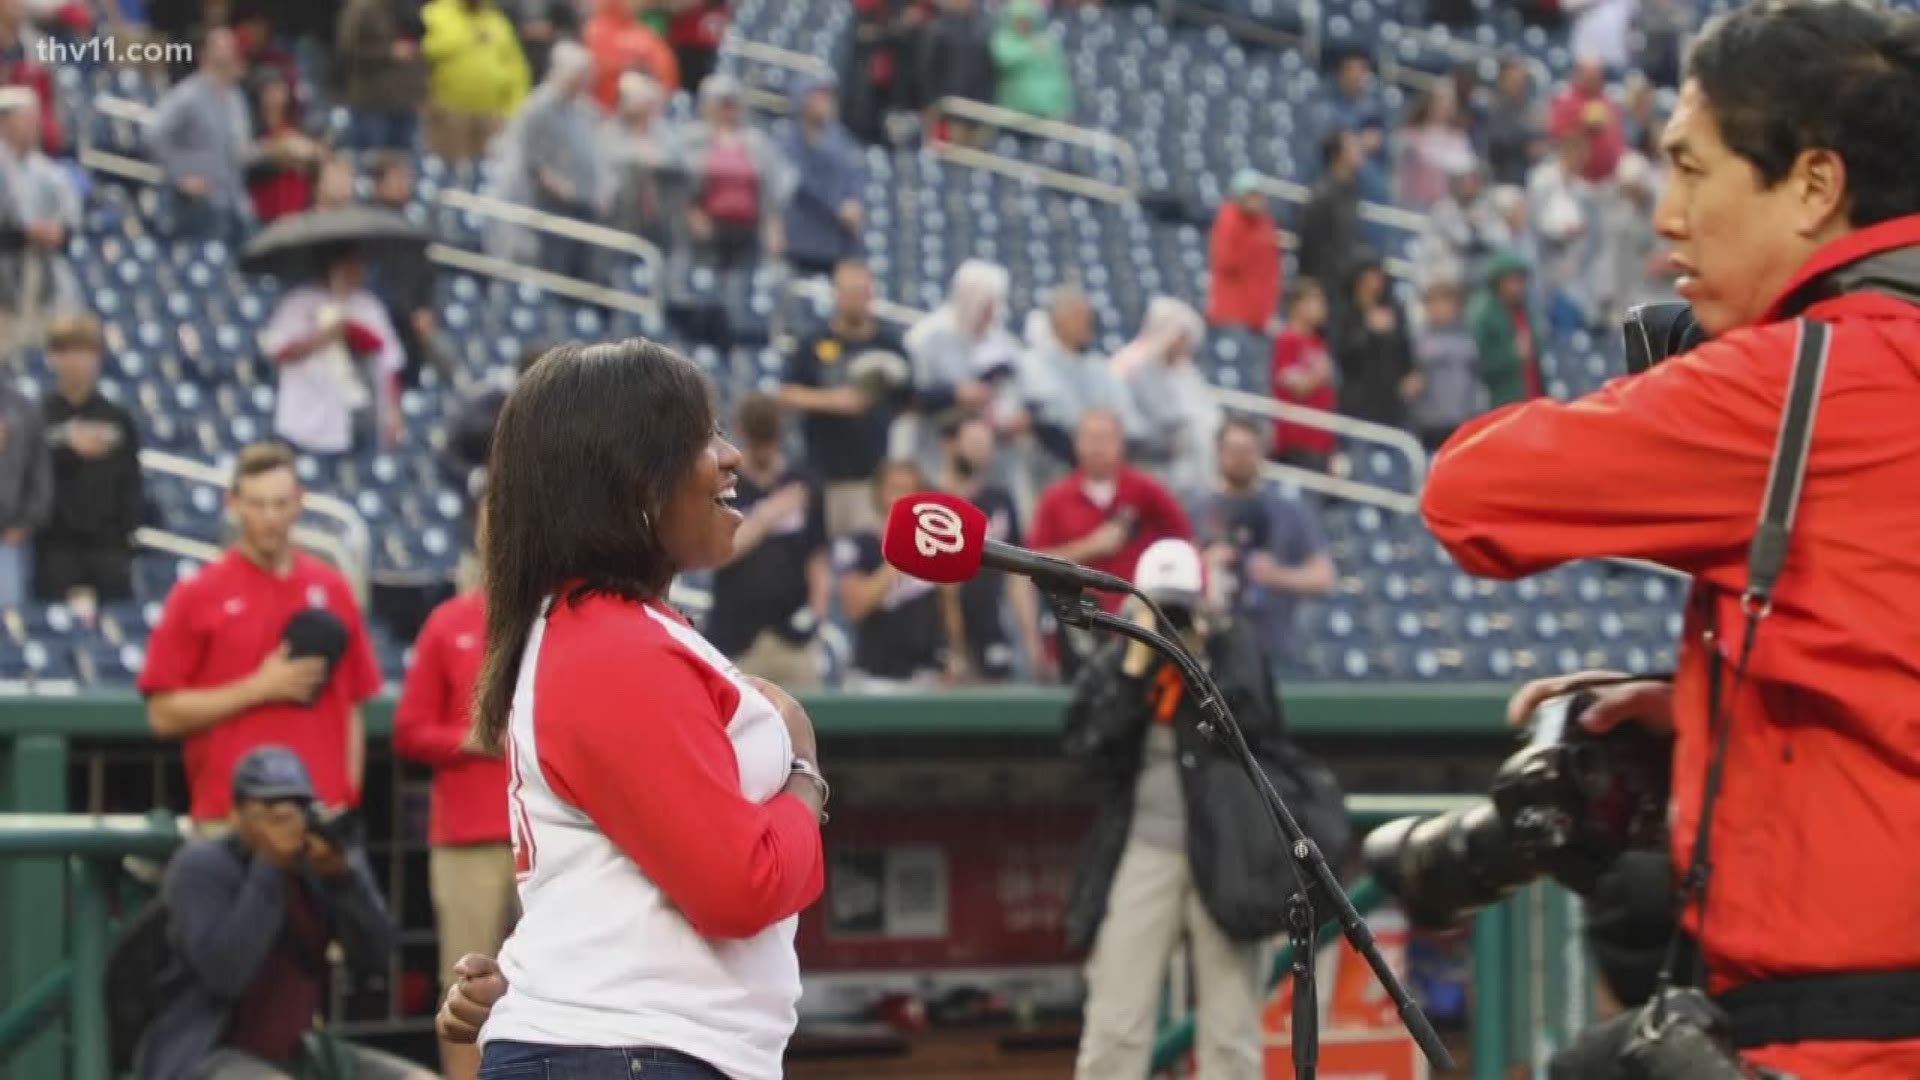 14-year-old Little Rock teen Tania Kelley is making us proud by singing the national anthem at a Washington Nationals game last month.